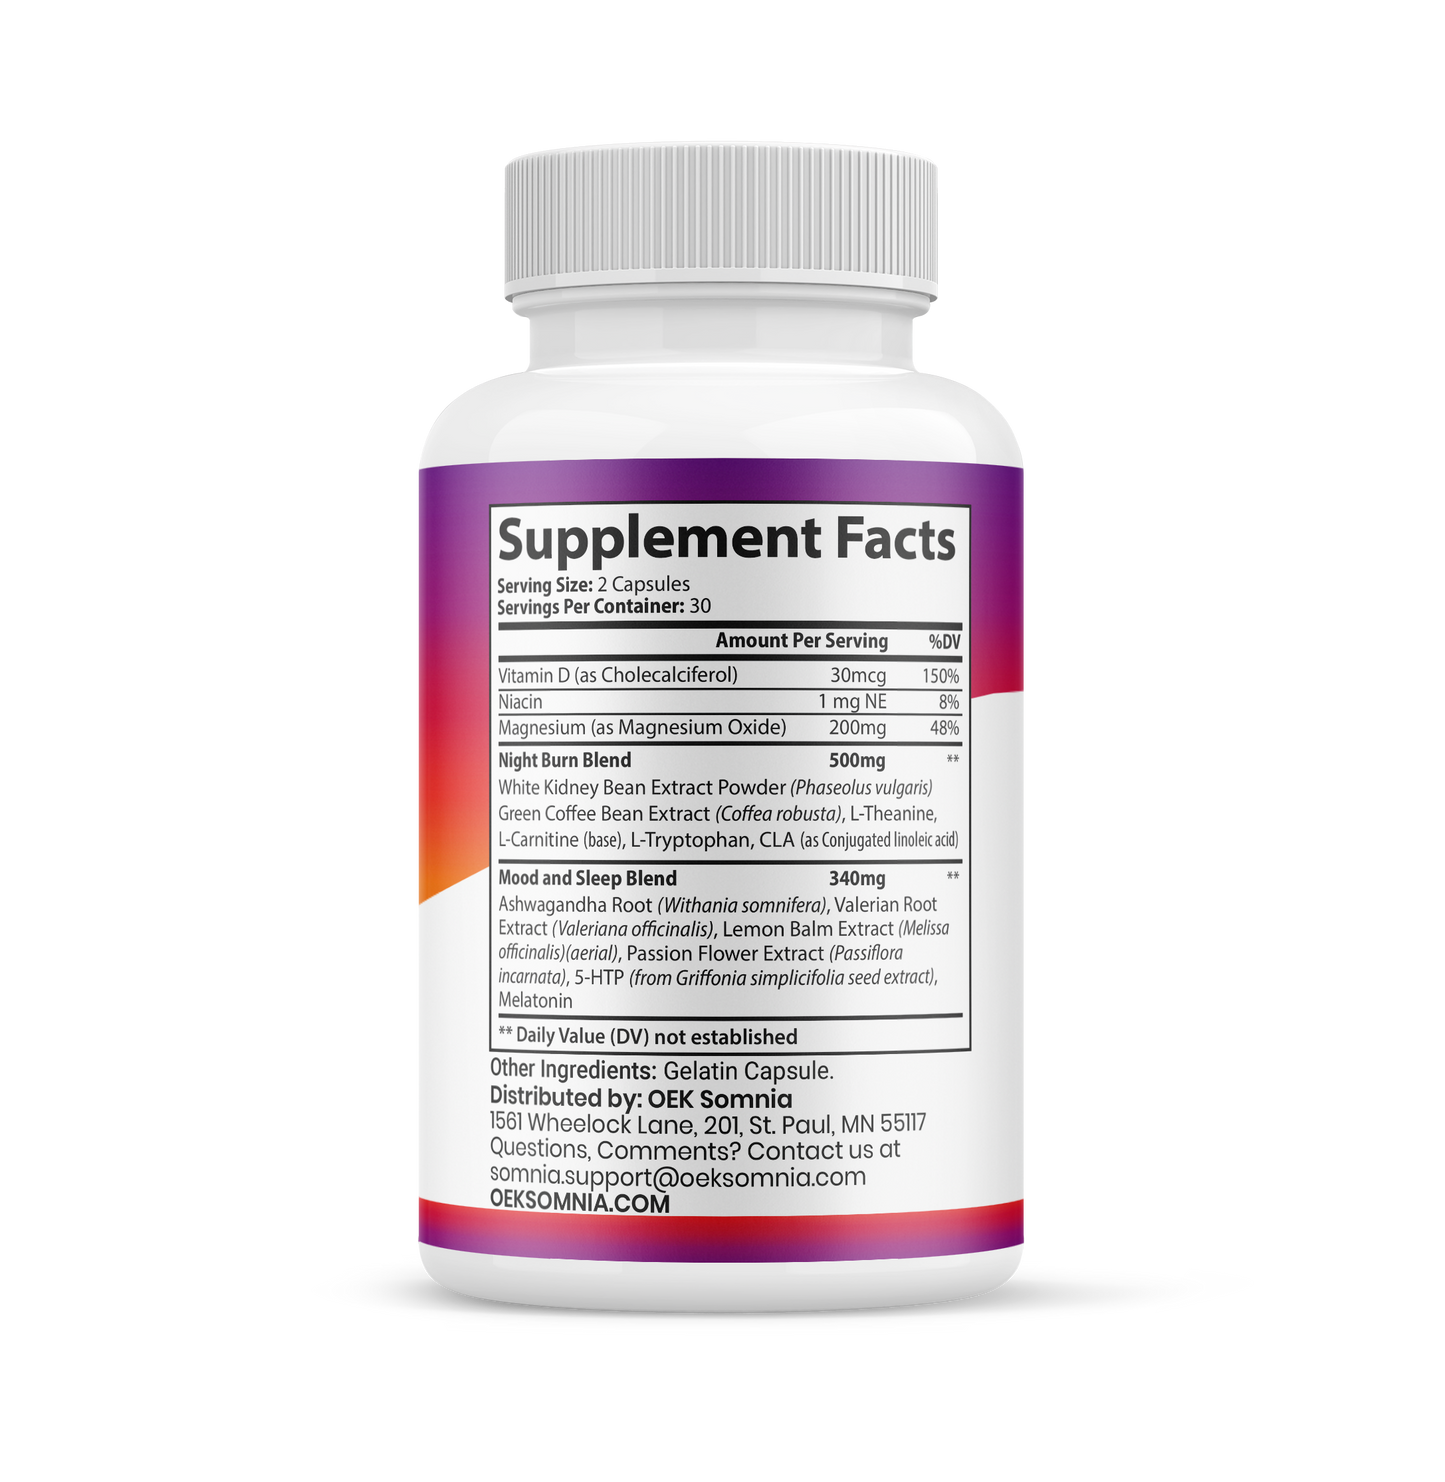 OEK Night Time Fat Burner Supplement Facts